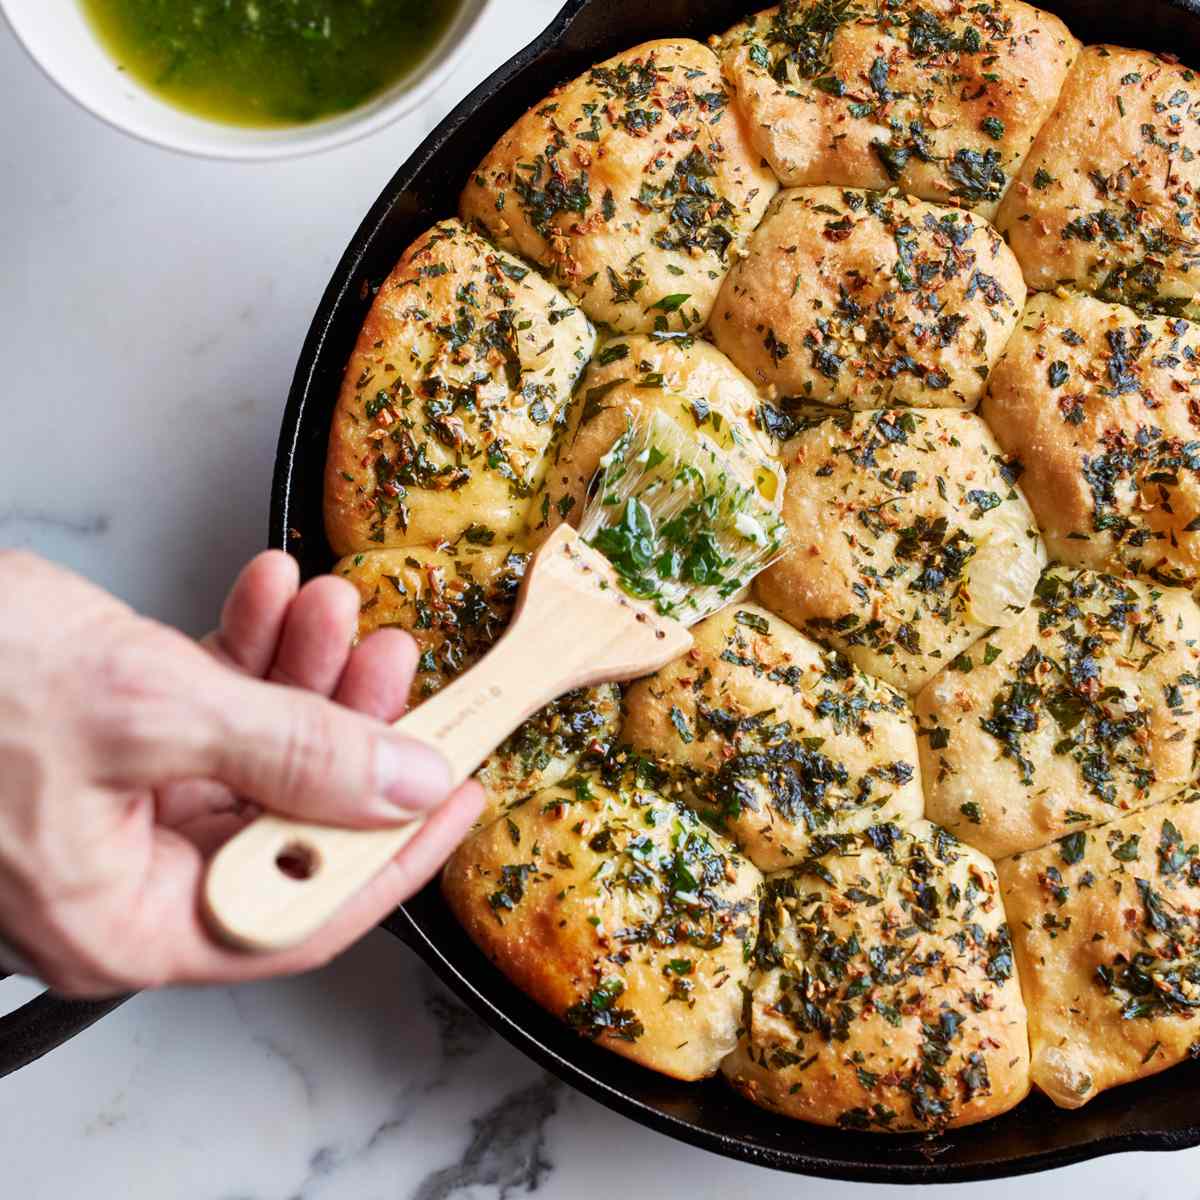 Caraway Rolls with Garlic-Parsley Butter